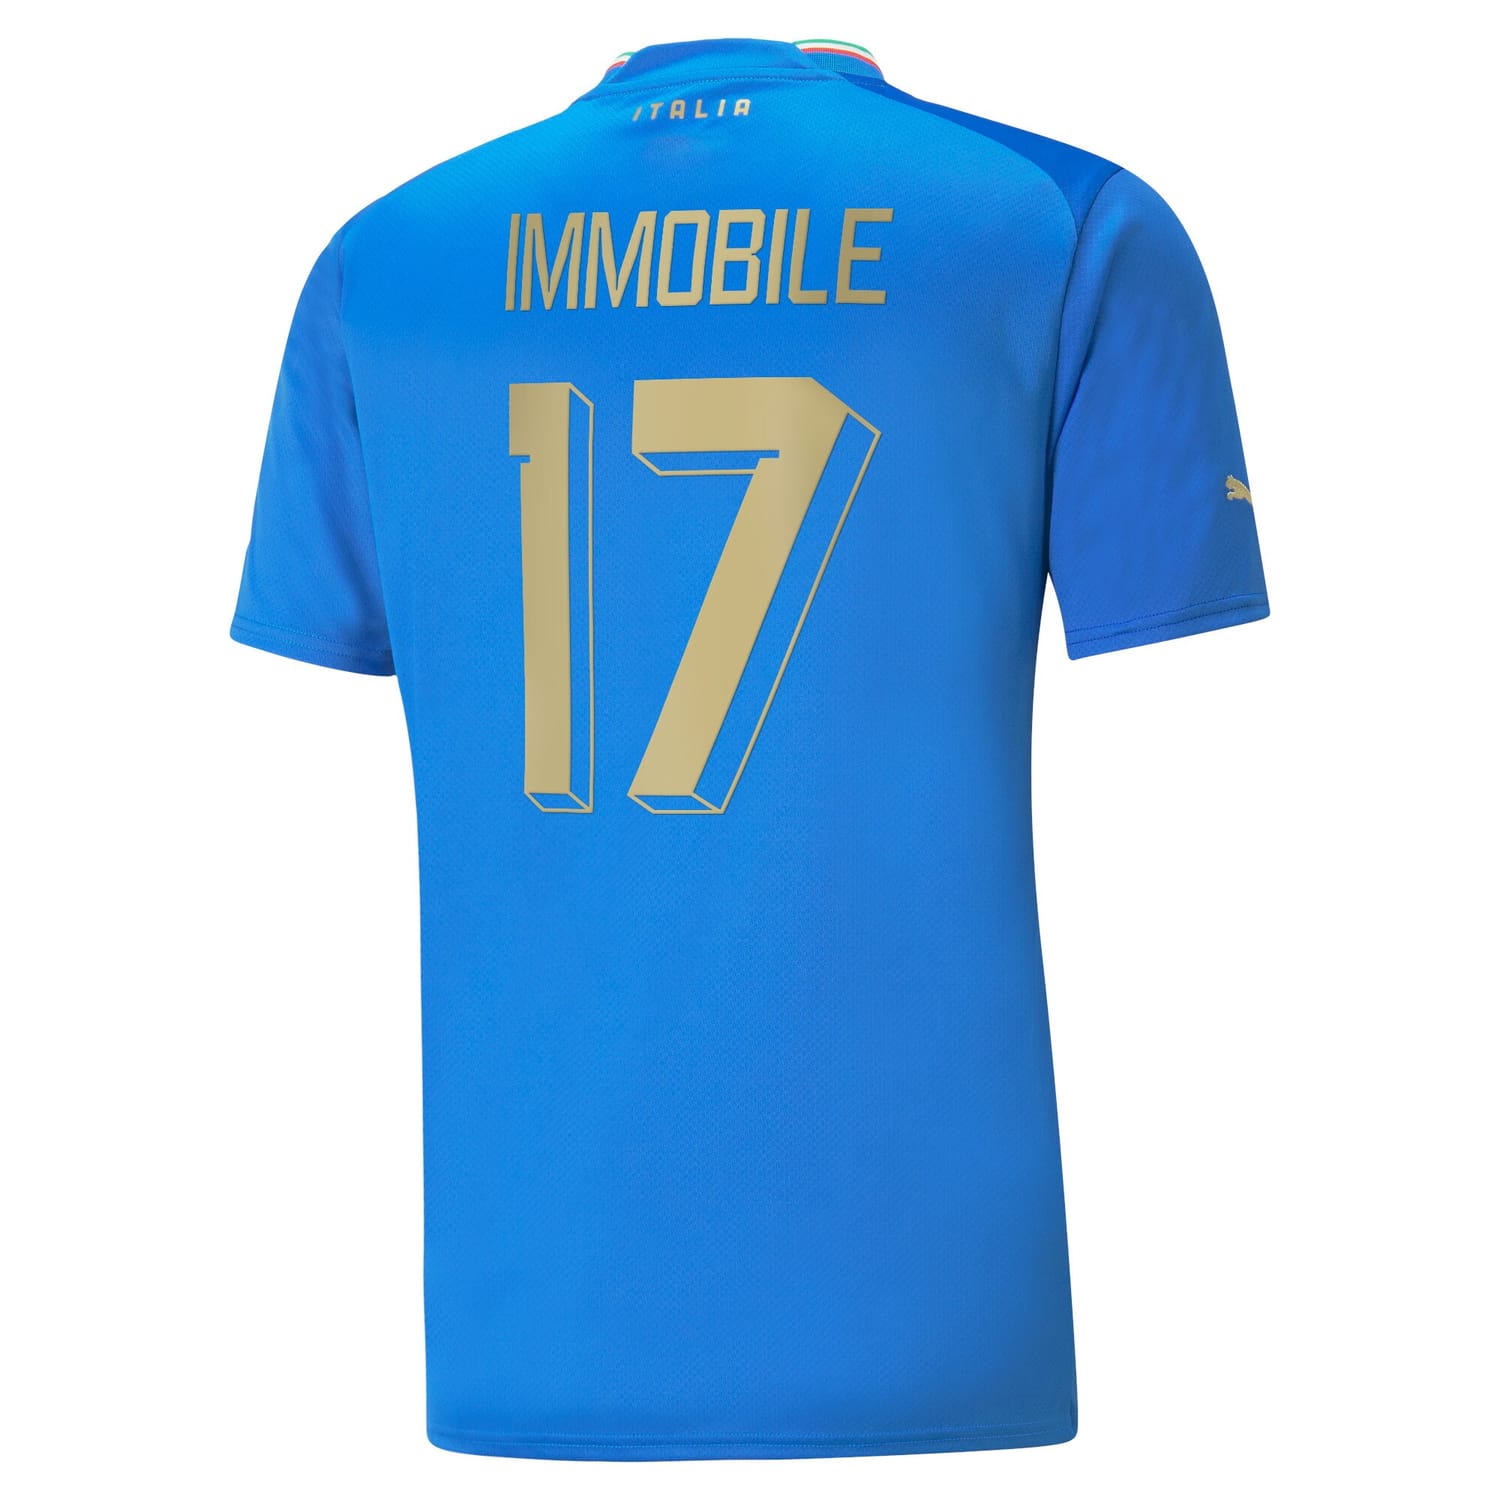 Italy National Team Home Jersey Shirt player Ciro Immobile 17 printing for Men